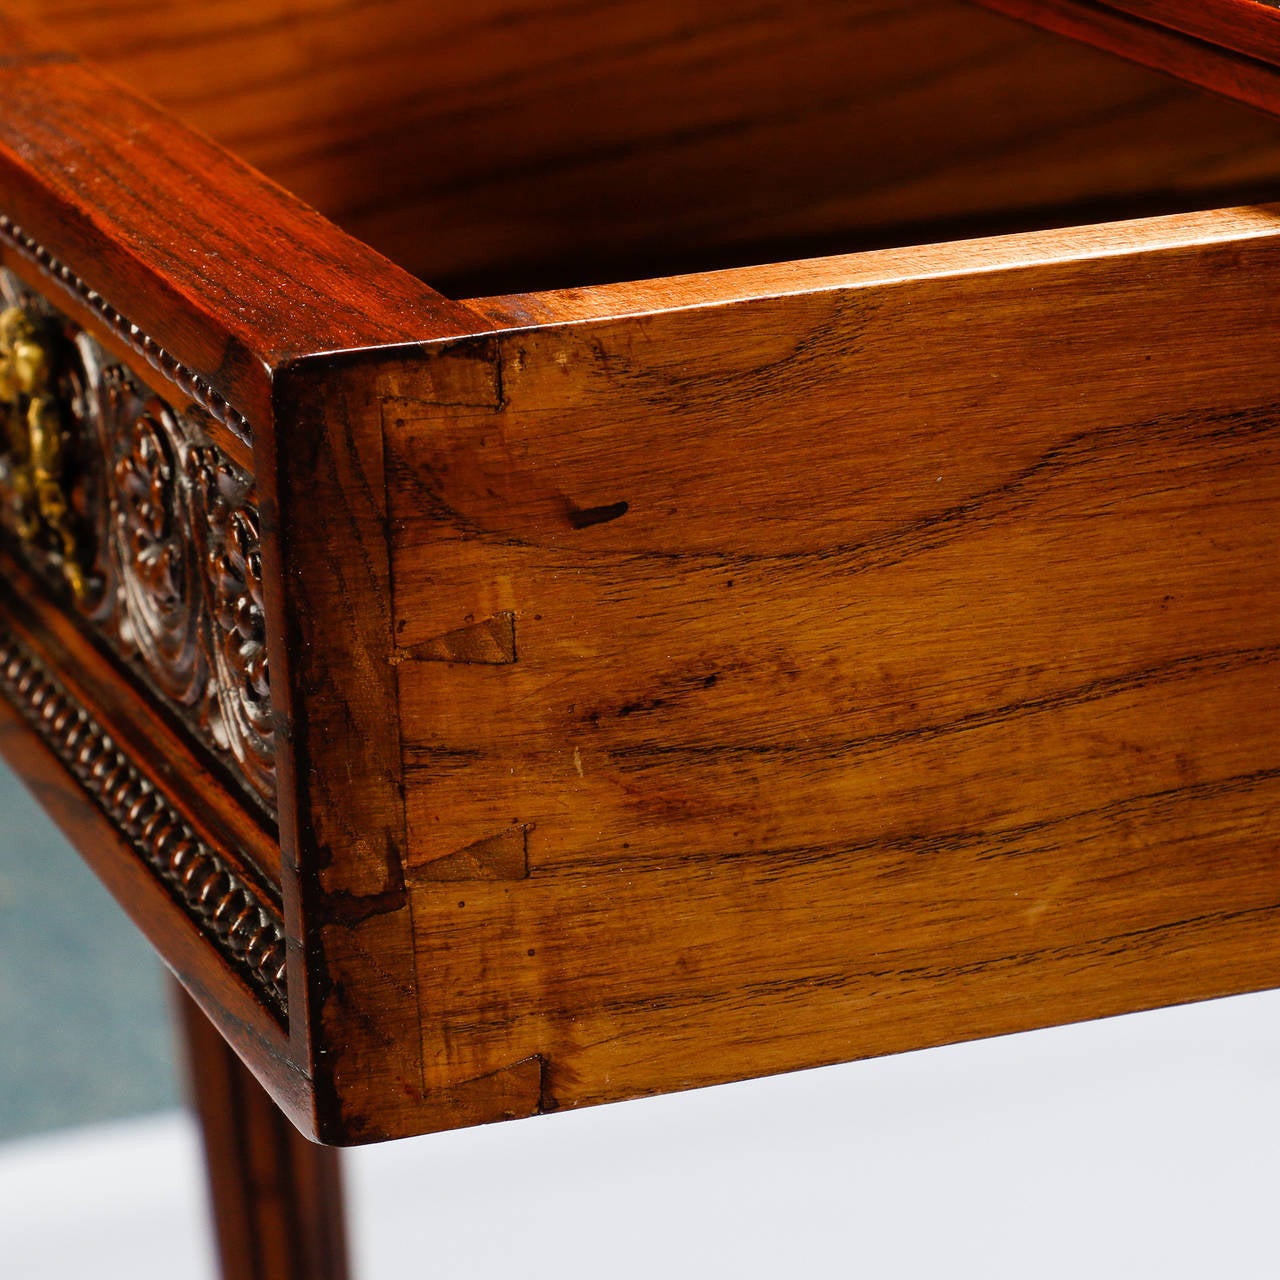 Early 20th Century French Writing Desk with Carved Details and Back Plinth